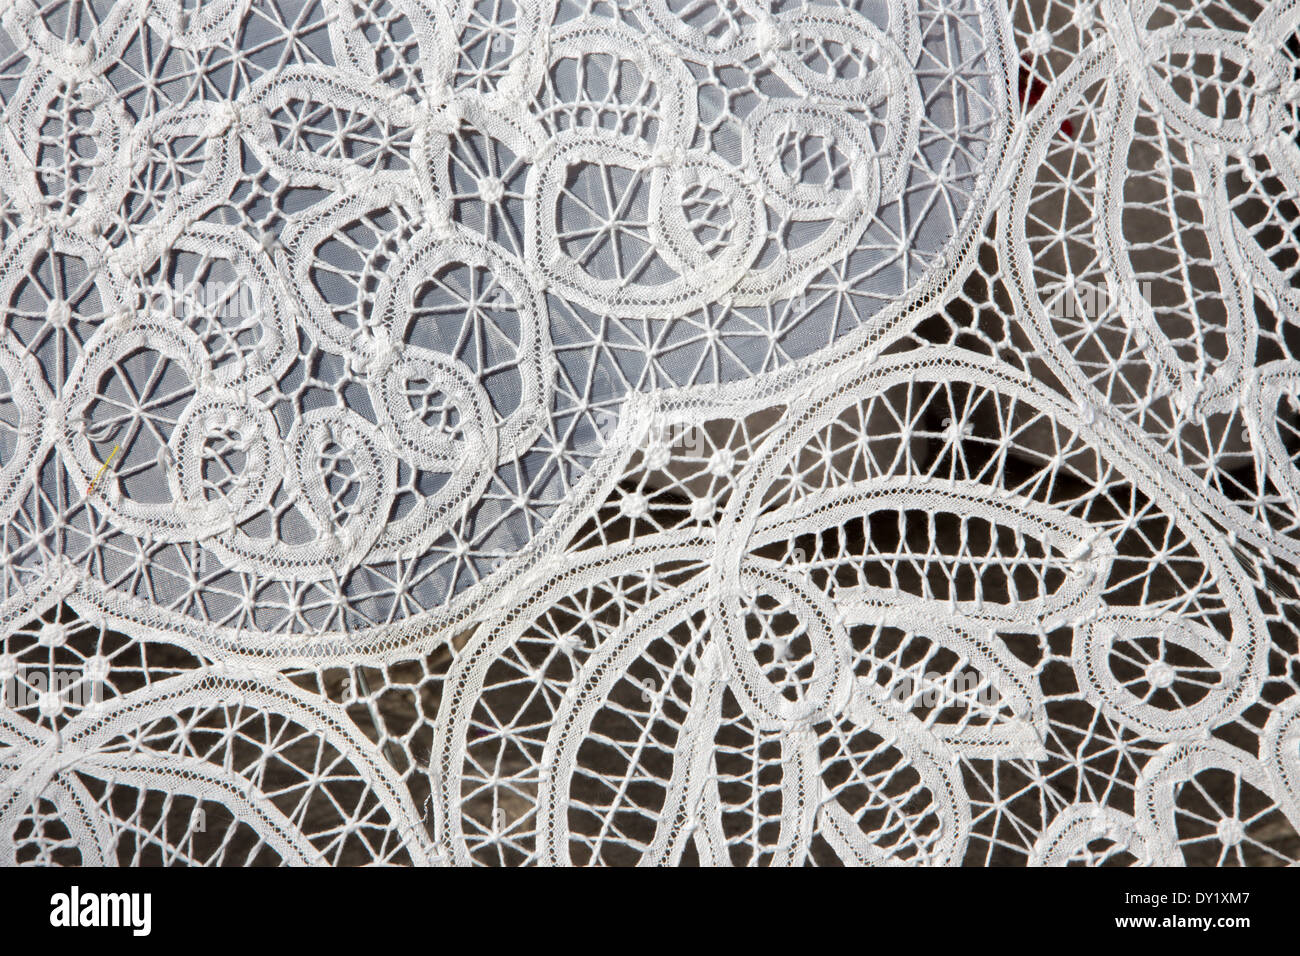 Venice - detail from lace on market of Burano Island. Stock Photo